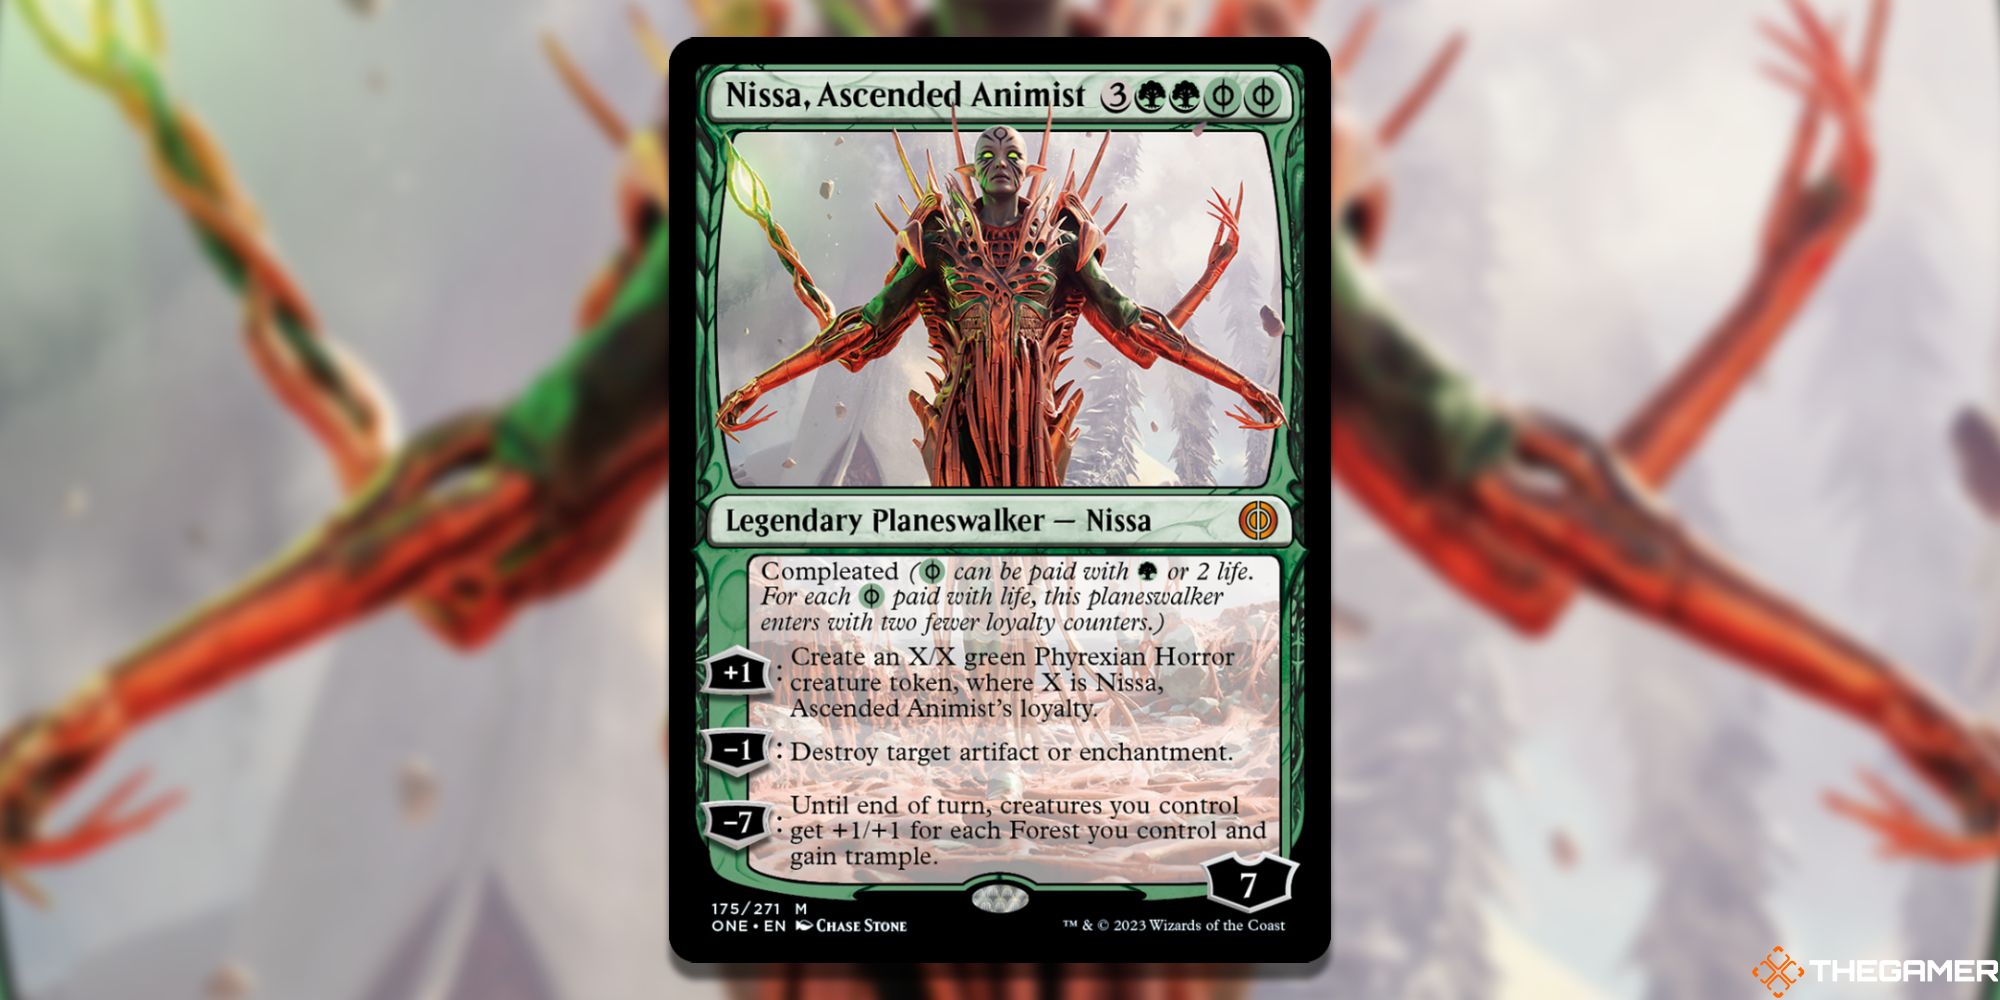 The card Nissa, Ascended Animist from Magic: The Gathering.